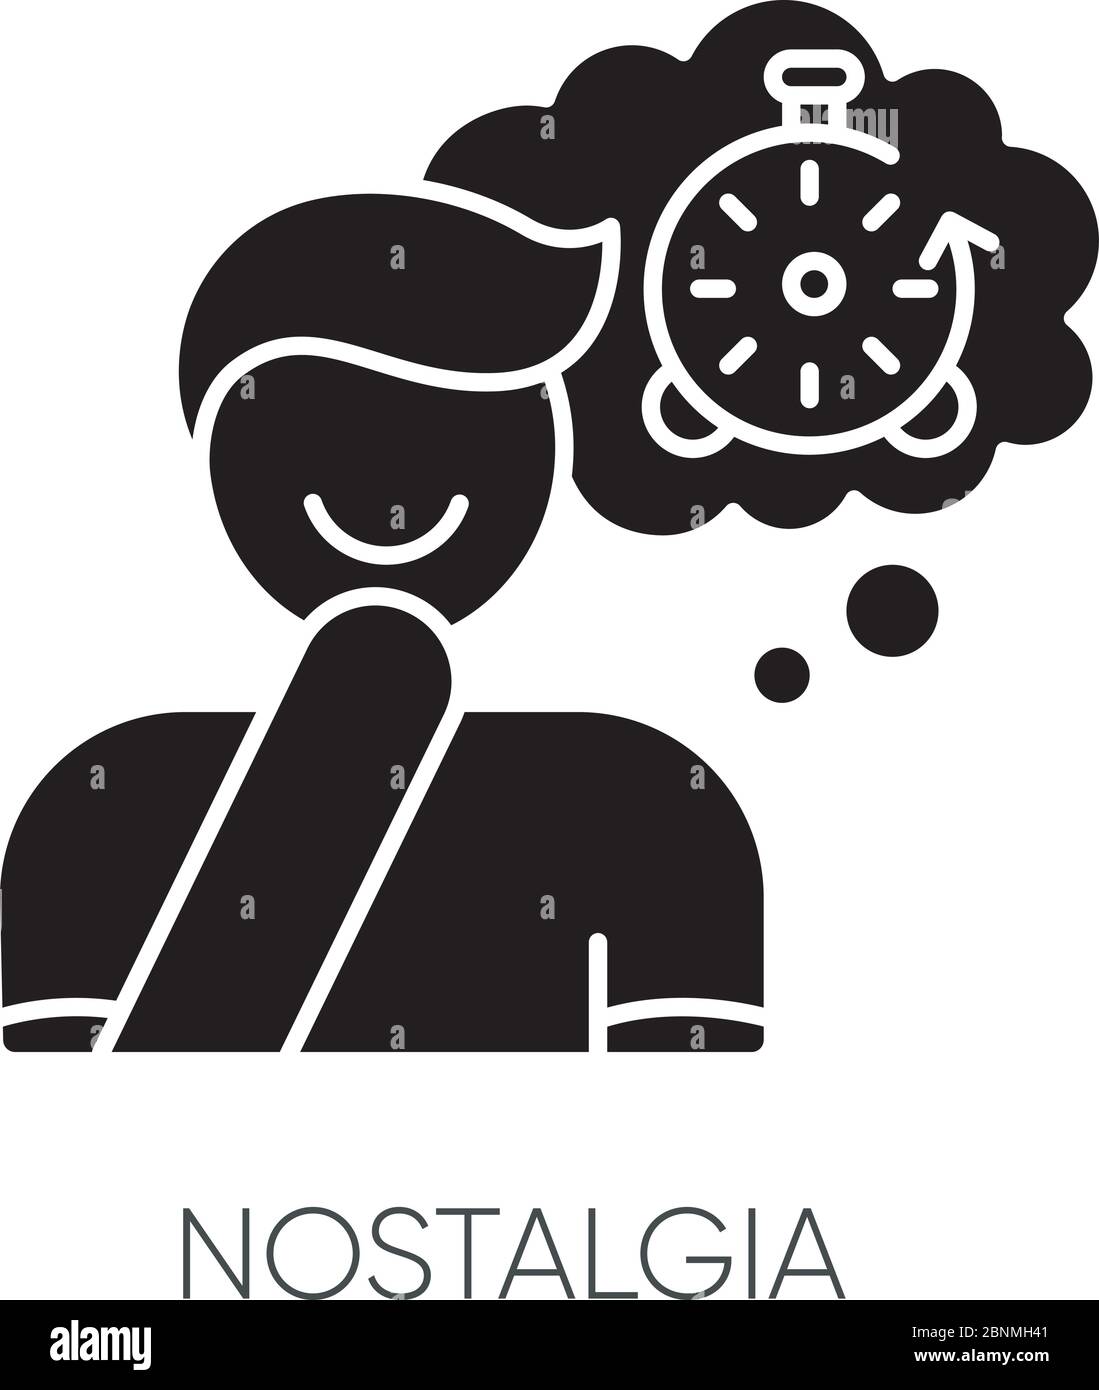 Nostalgia black glyph icon. Positive mood. Man feeling sentimental. Person reflecting on past. Memory trigger. Emotional intelligence. Silhouette symbol on white space. Vector isolated illustration Stock Vector